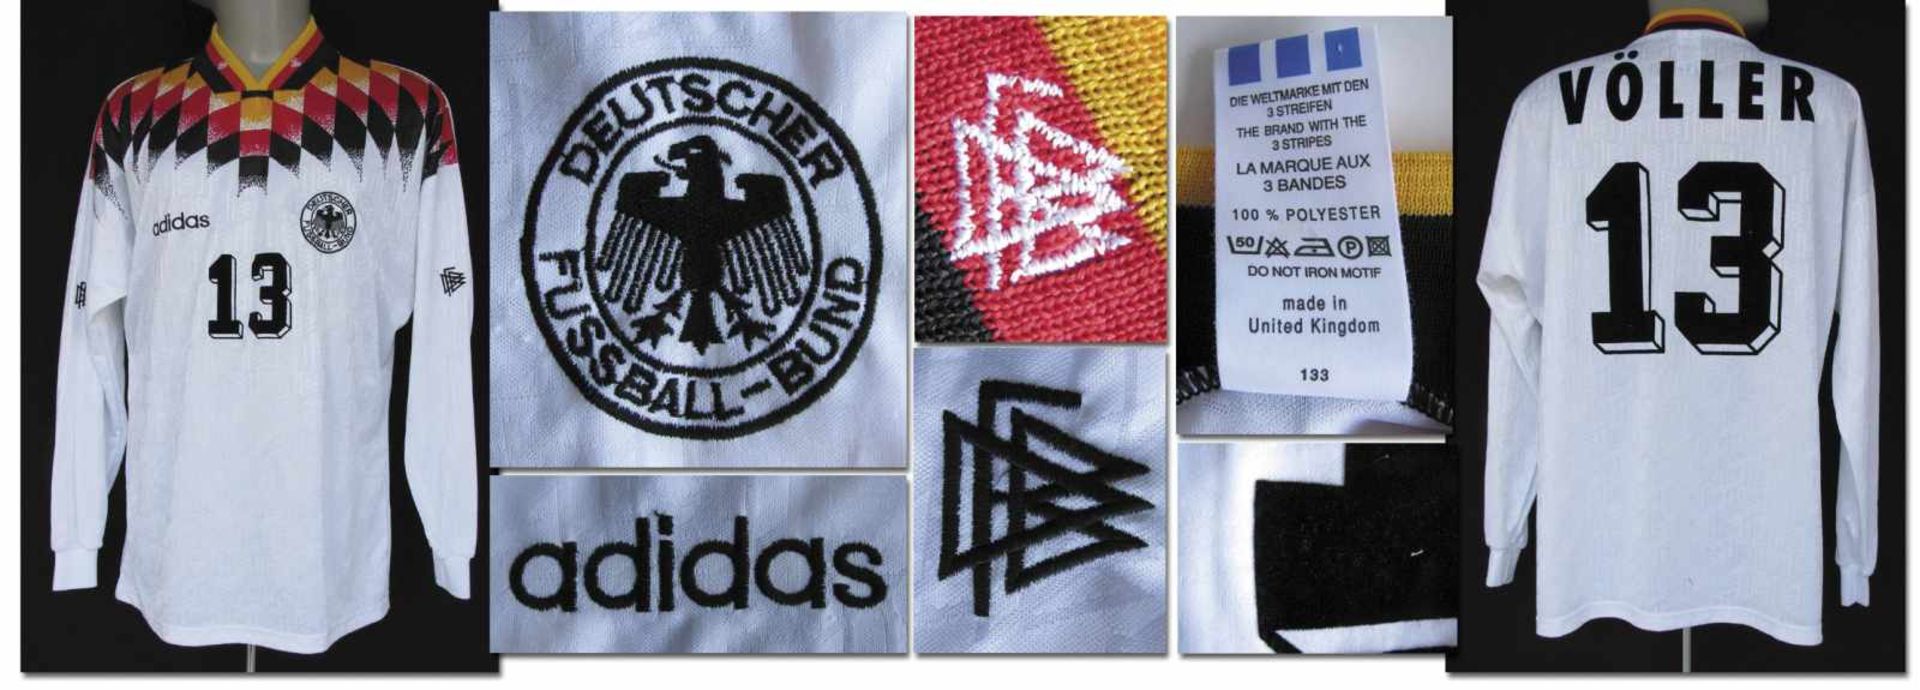 World Cup 1994 match issued fooball Shirt Germany - Original match issued shirt Germany with